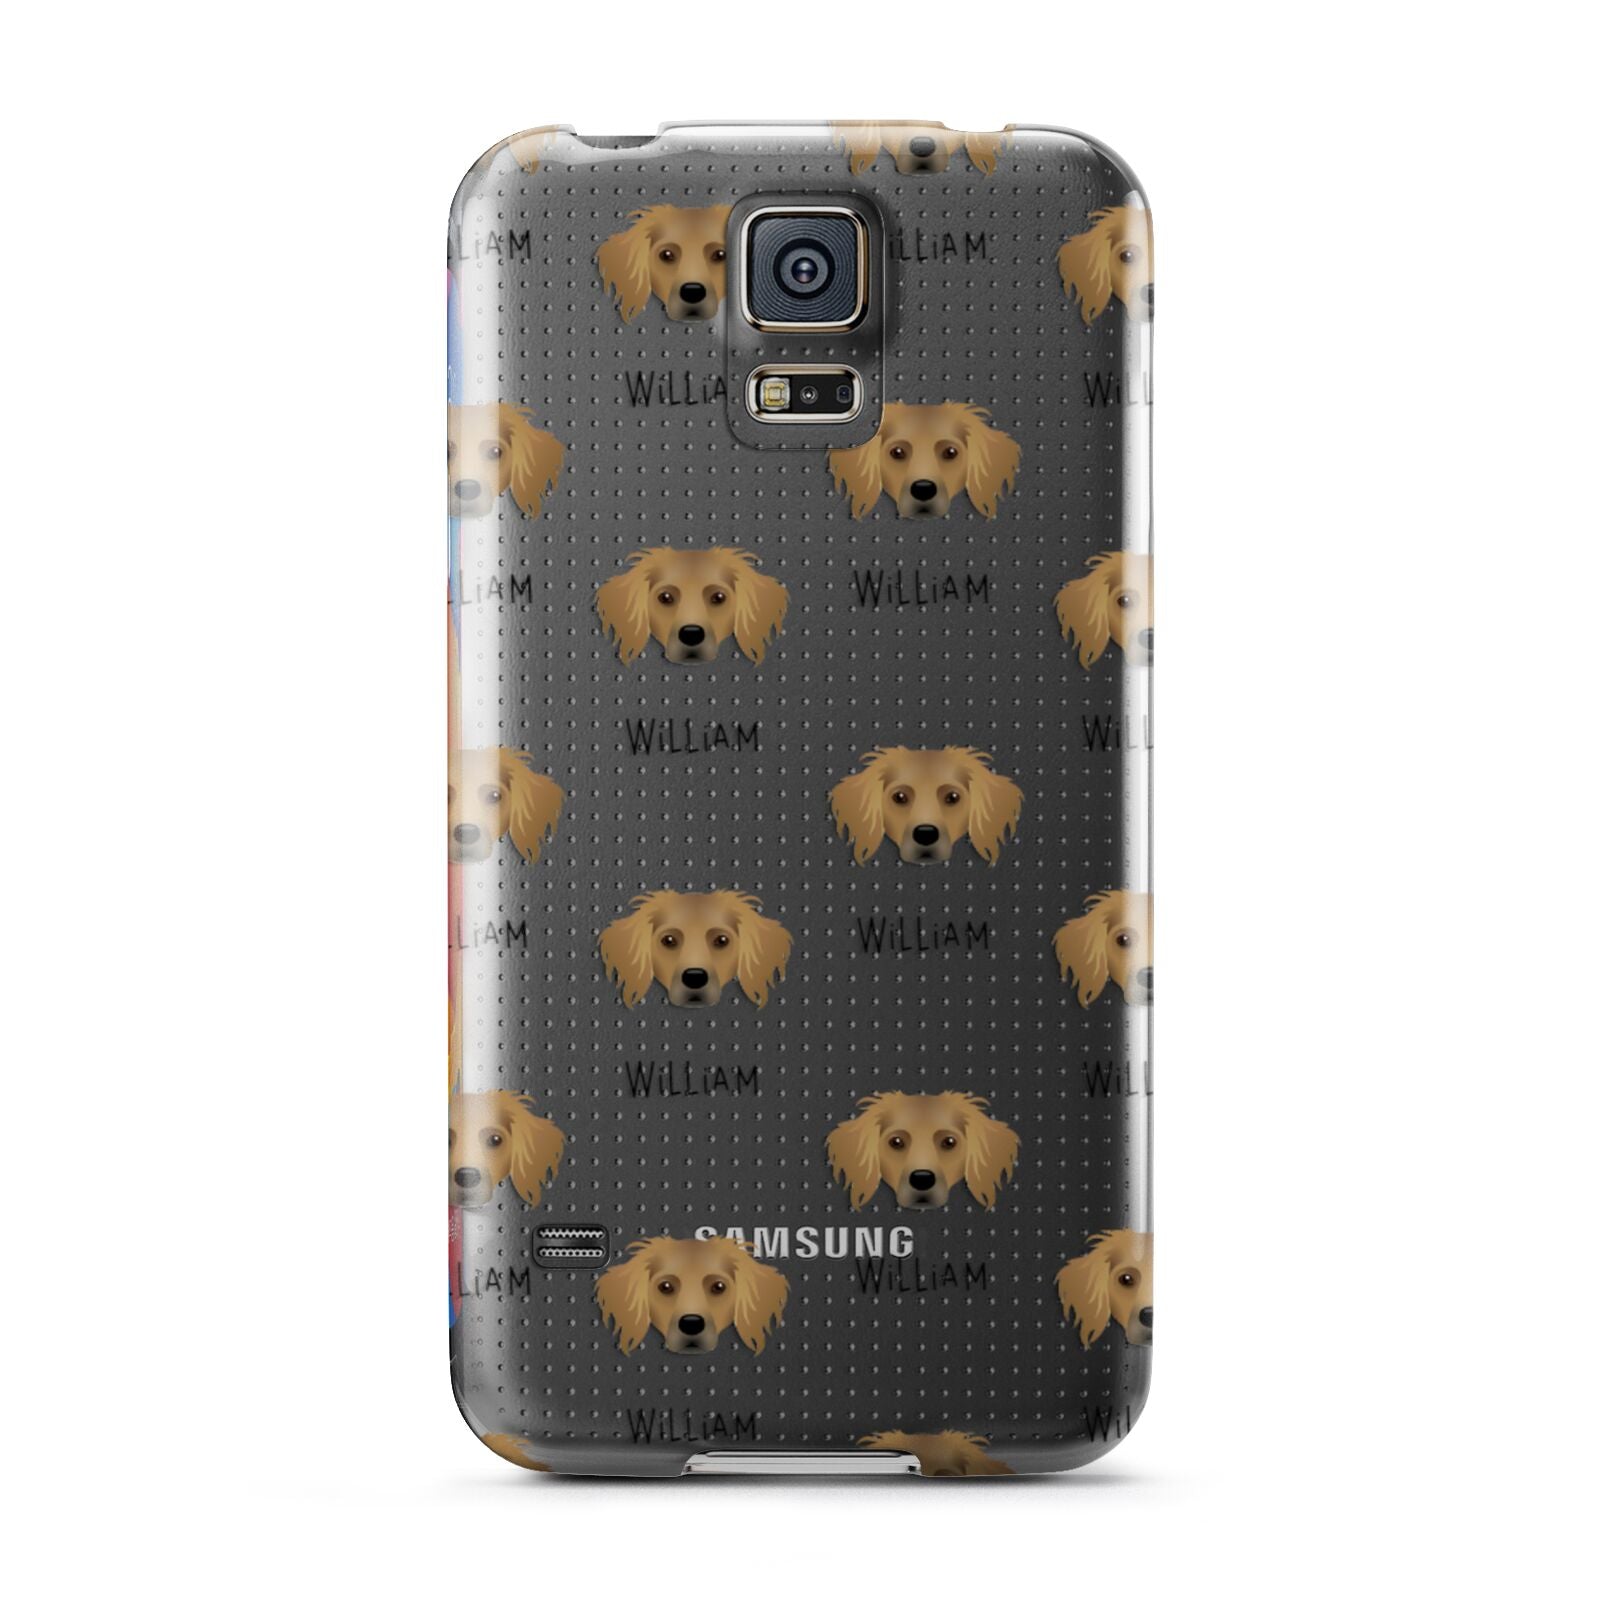 Dameranian Icon with Name Samsung Galaxy S5 Case